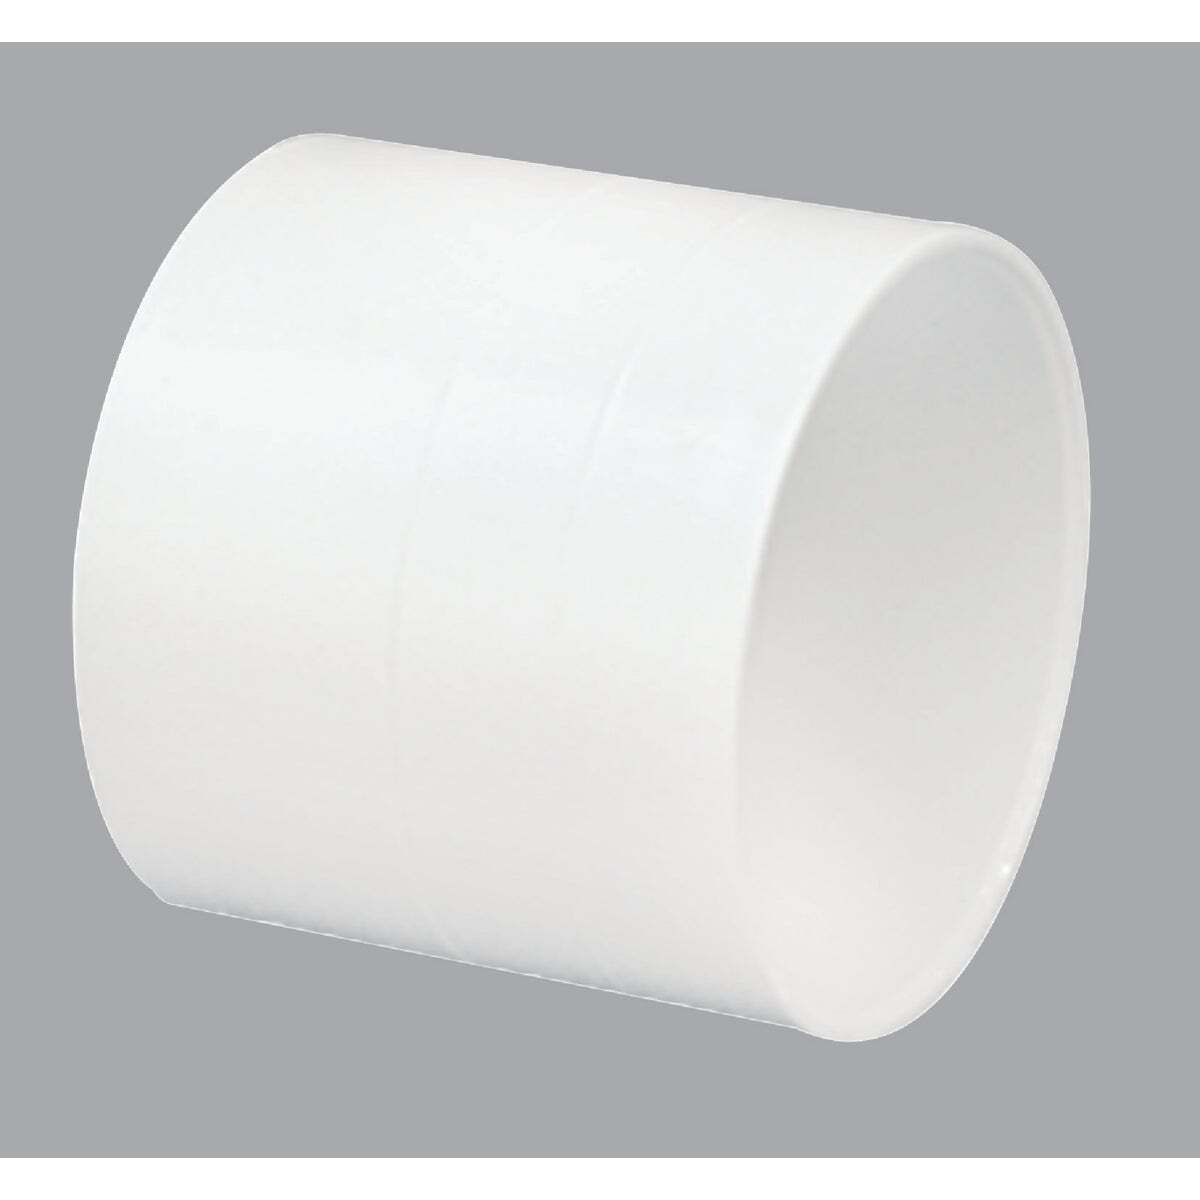 IPEX Canplas SDR 35 6 In. PVC Sewer and Drain Coupling 414216BC IPEX Canplas